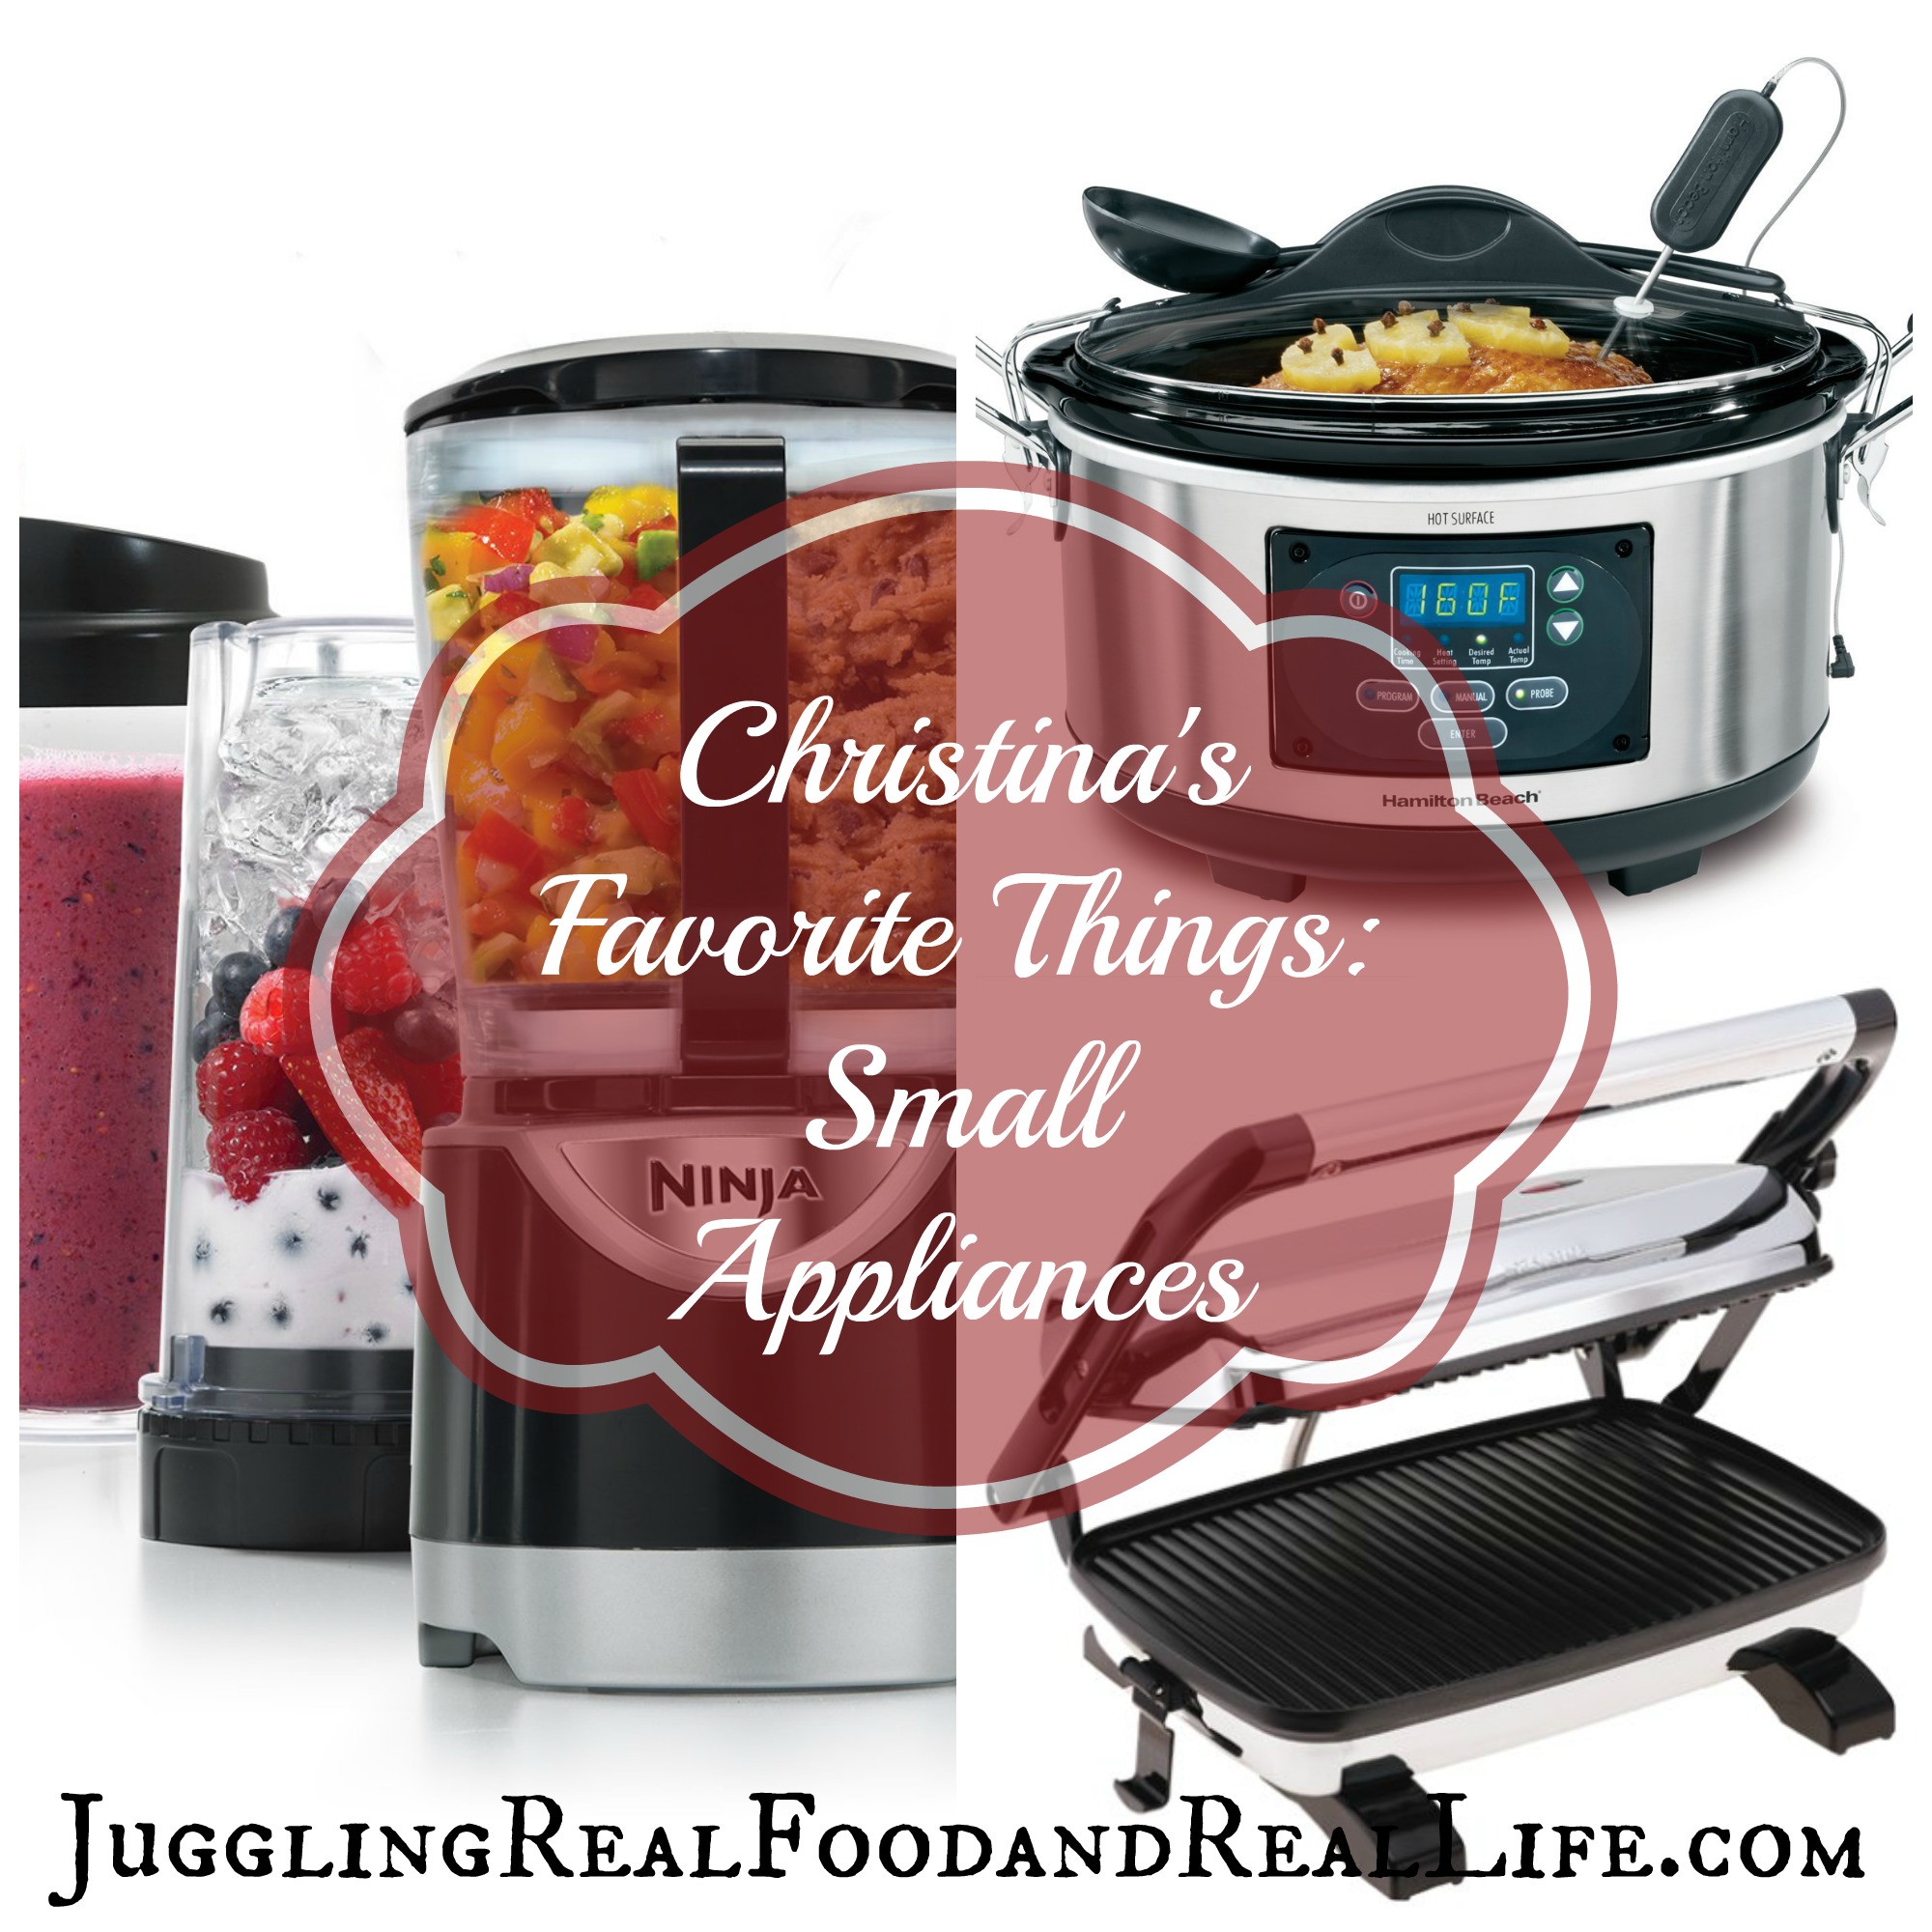 Christina’s Favorite Things:  Small Kitchen Appliances